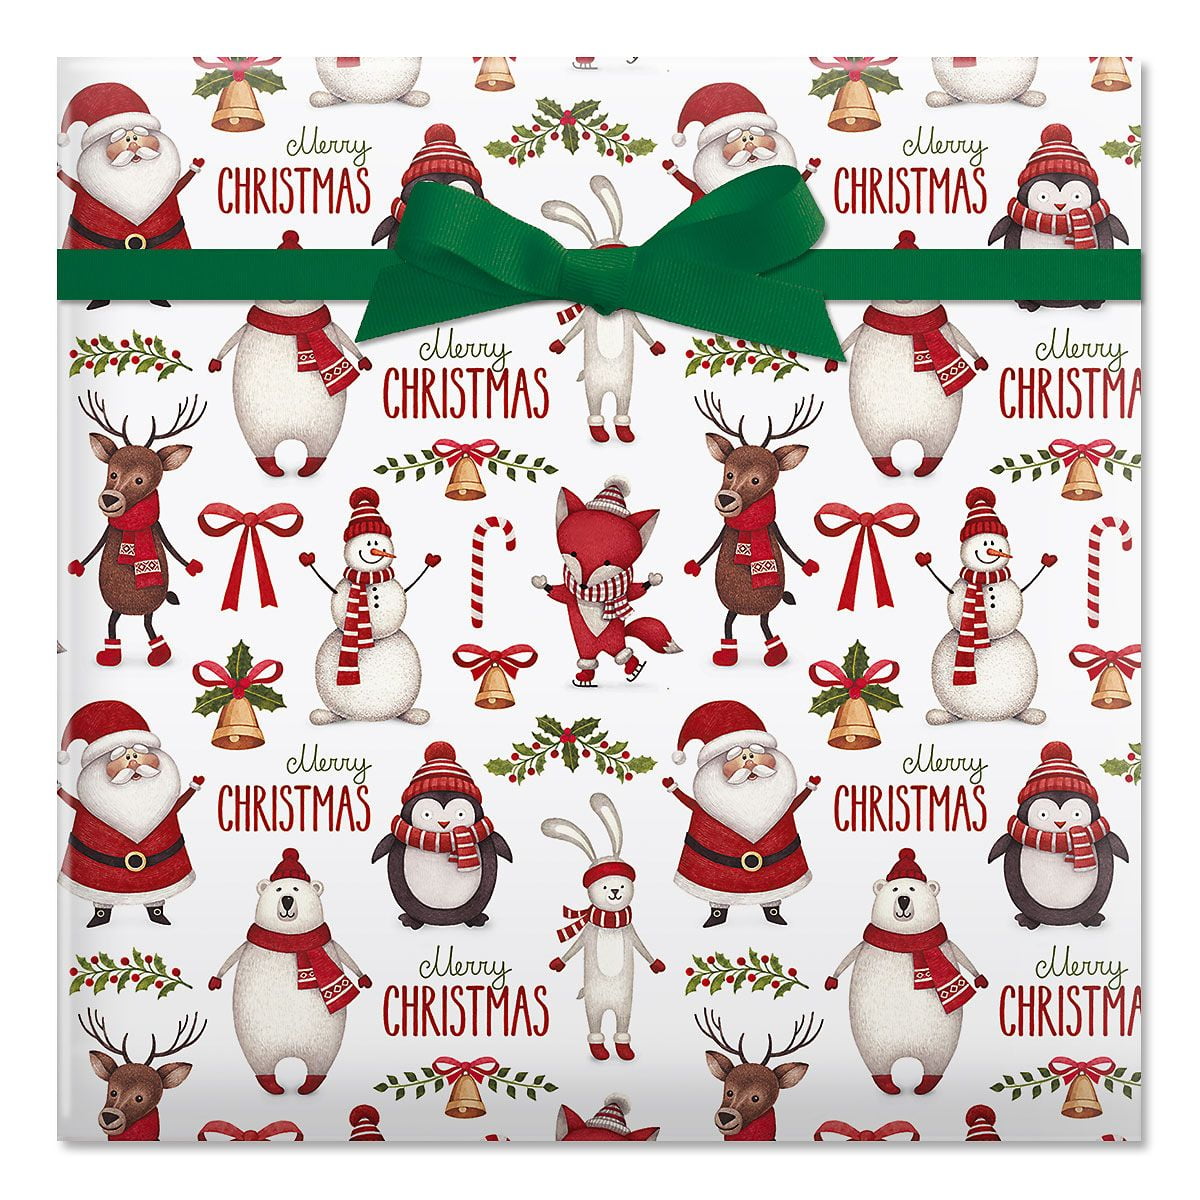 Current Sweet Treats Gingerbread Man Christmas Rolled Wrapping Paper -  Premium Jumbo 23-Inch x 32-Foot Gift Wrap Roll, 61 Square Feet Total